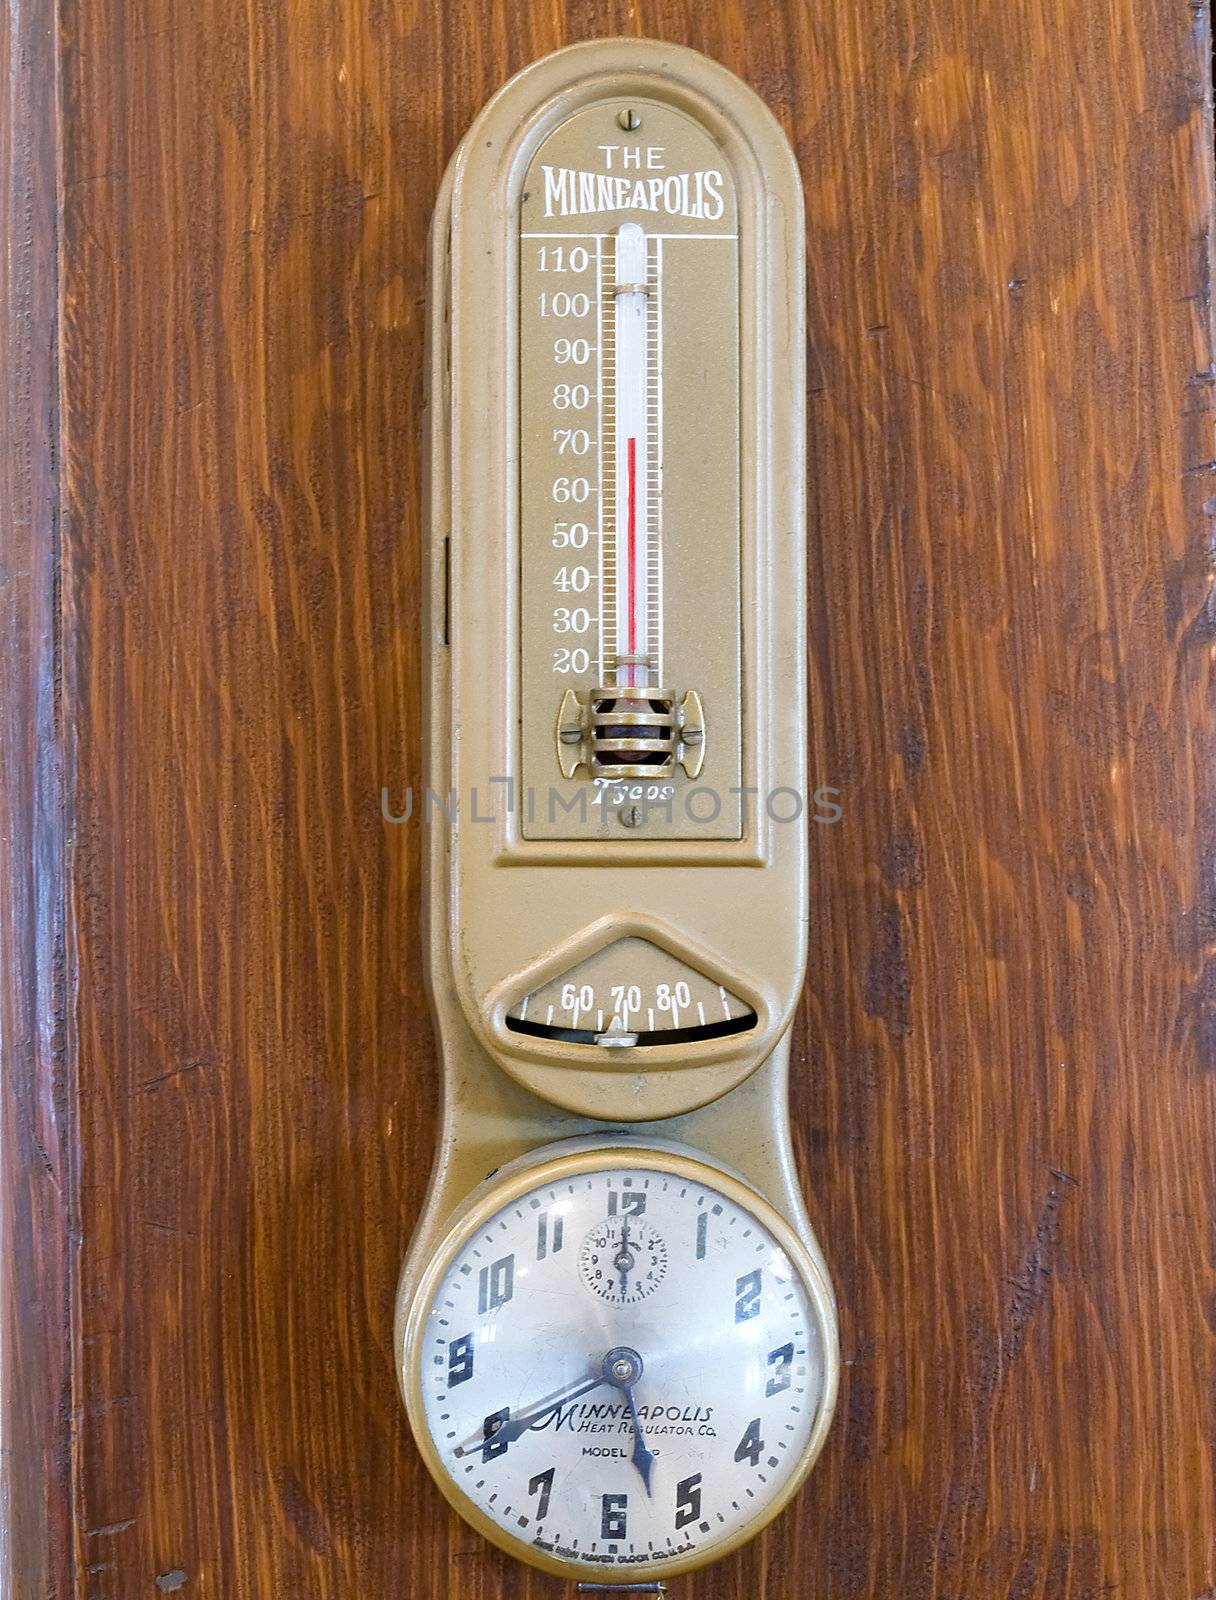 Very old thermometer hanging on a wooden post.